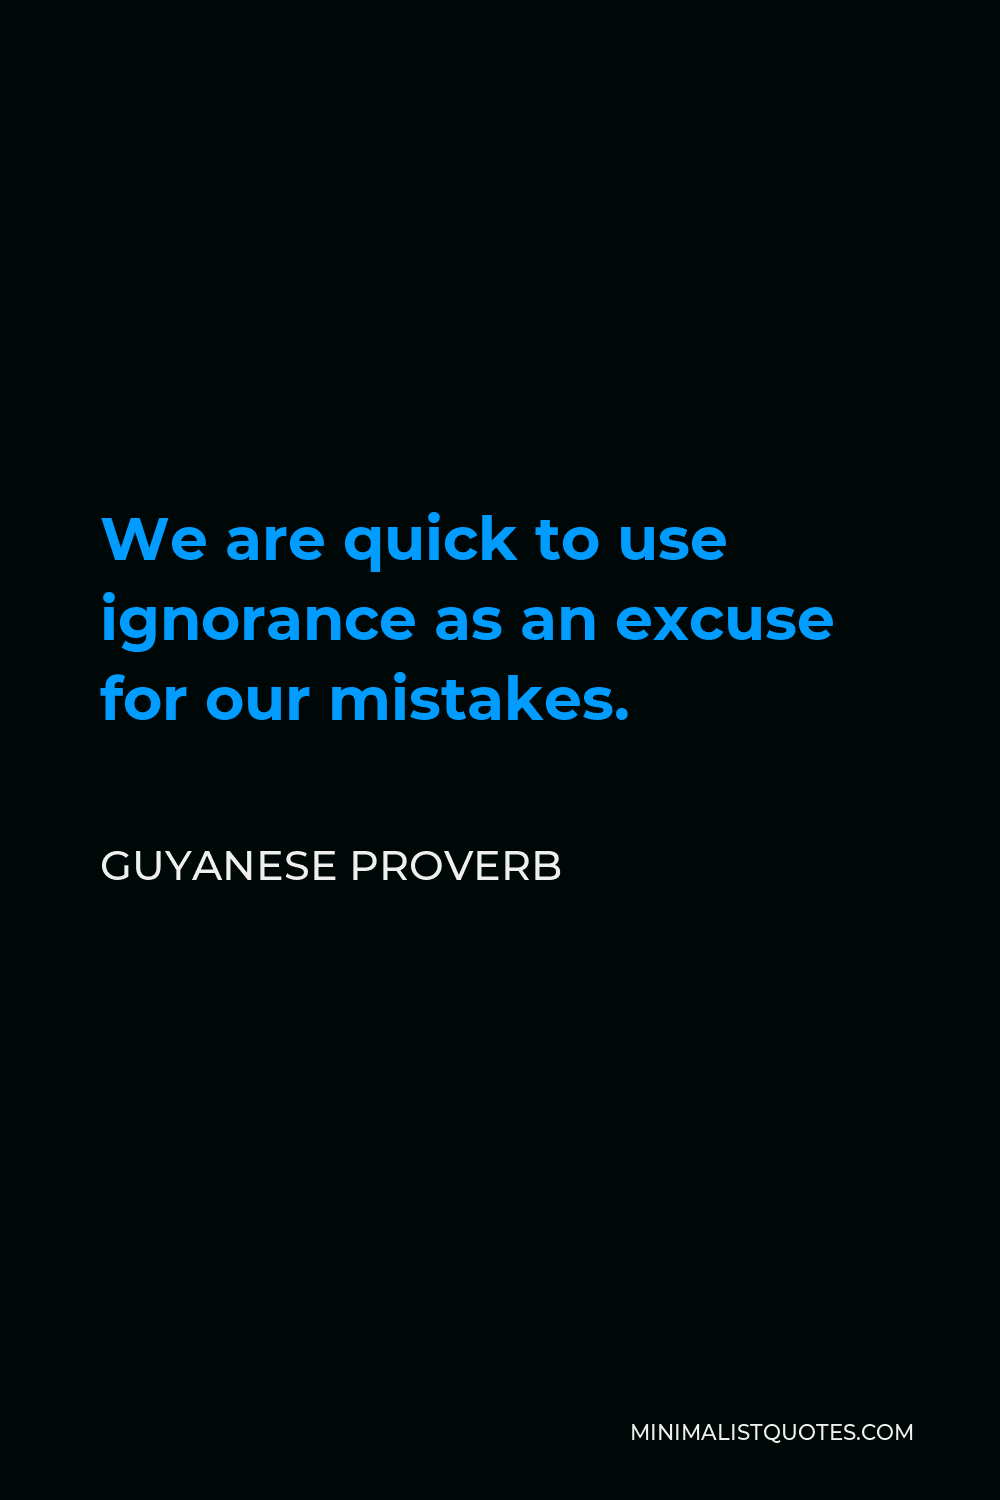 Guyanese Proverb Quote - We are quick to use ignorance as an excuse for our mistakes.